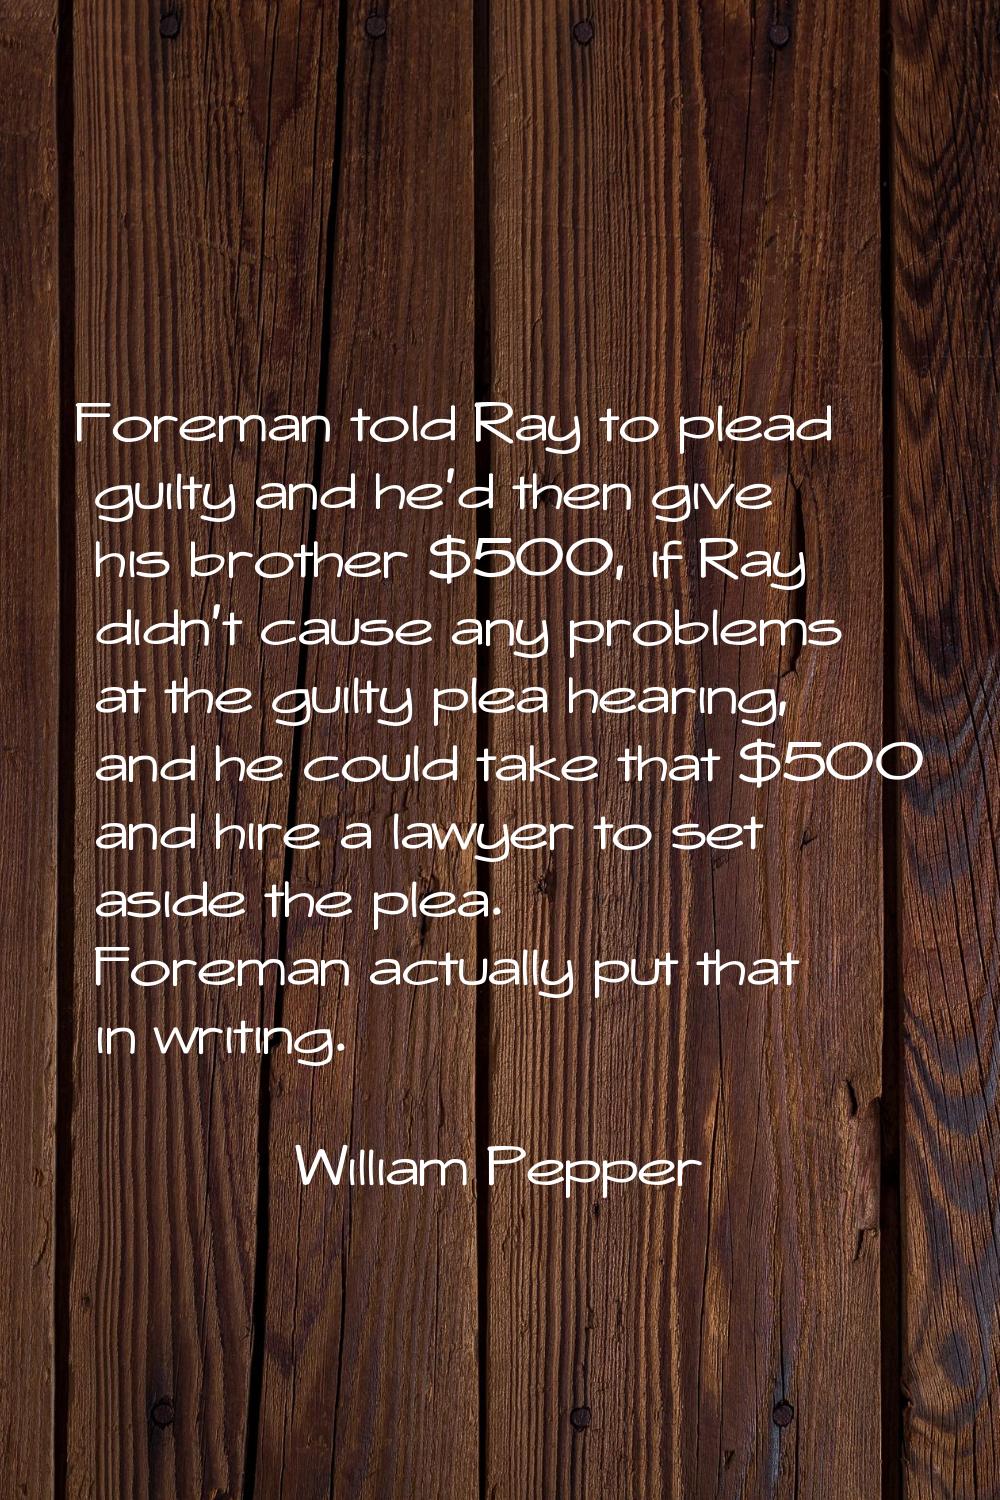 Foreman told Ray to plead guilty and he'd then give his brother $500, if Ray didn't cause any probl